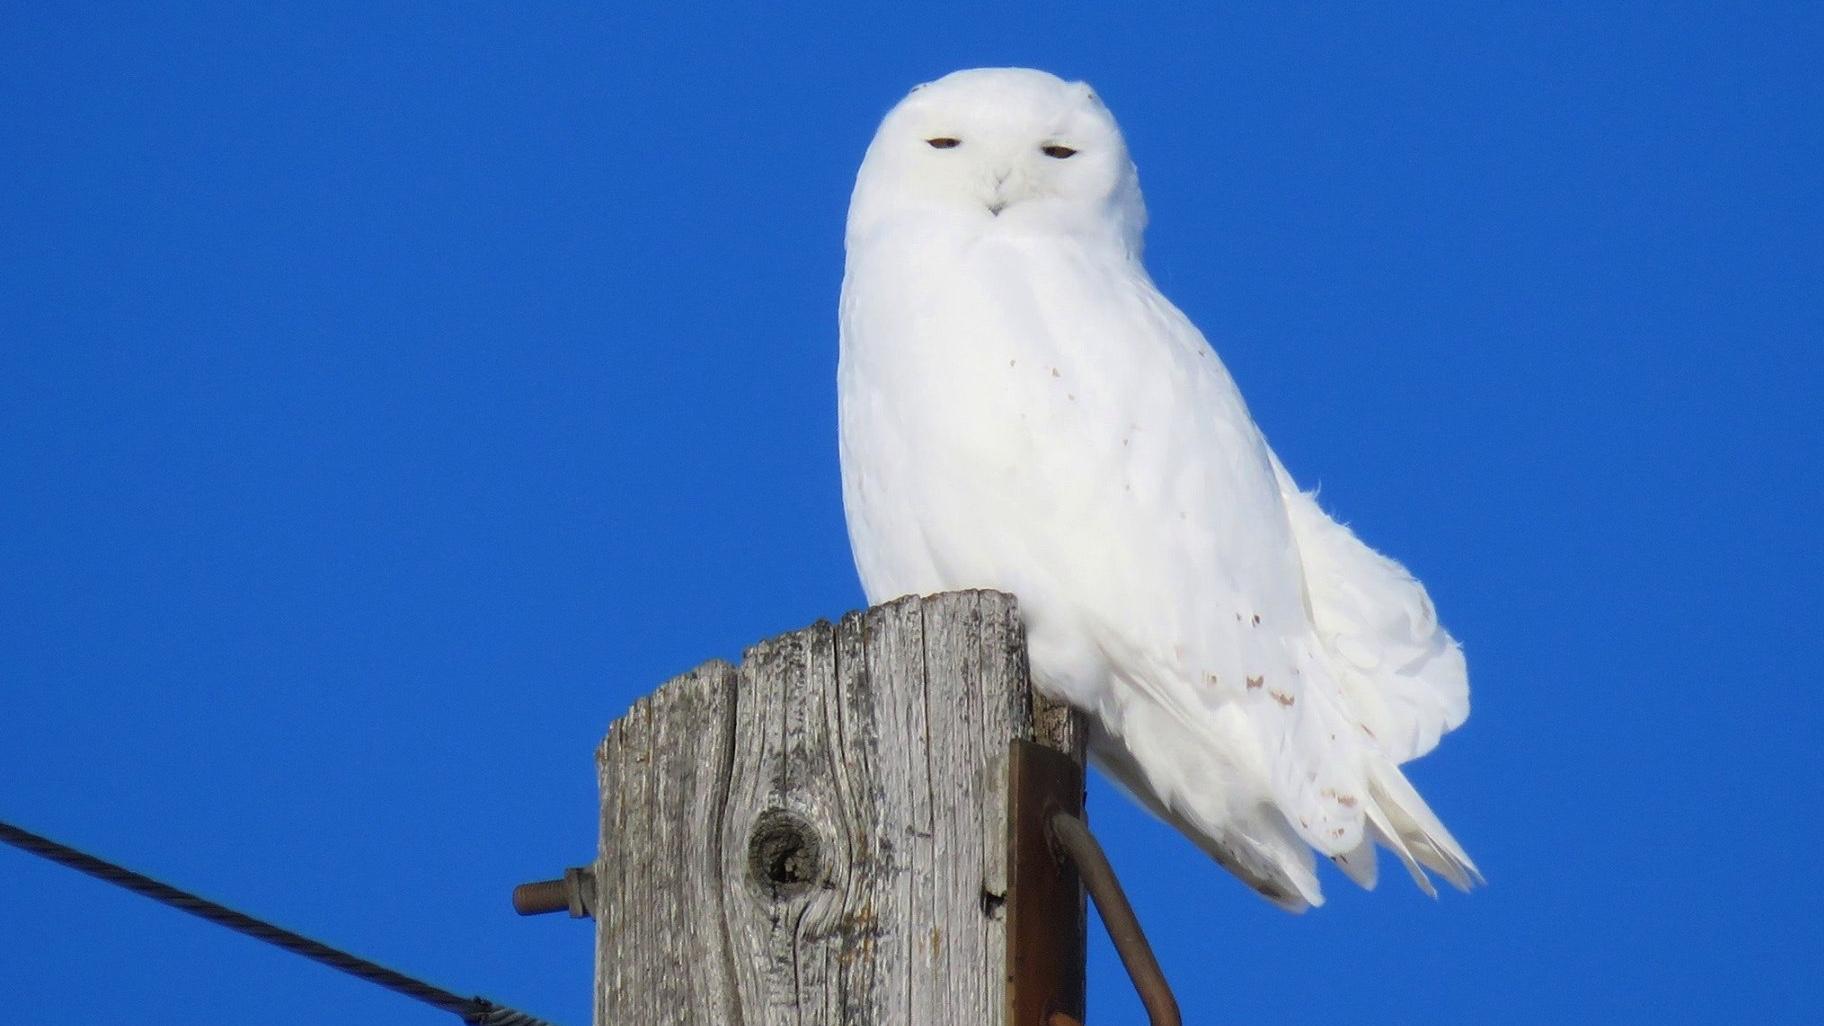 Snowy owls like to perch on fence posts and telephone poles. (U.S. Fish and Wildlife Service)